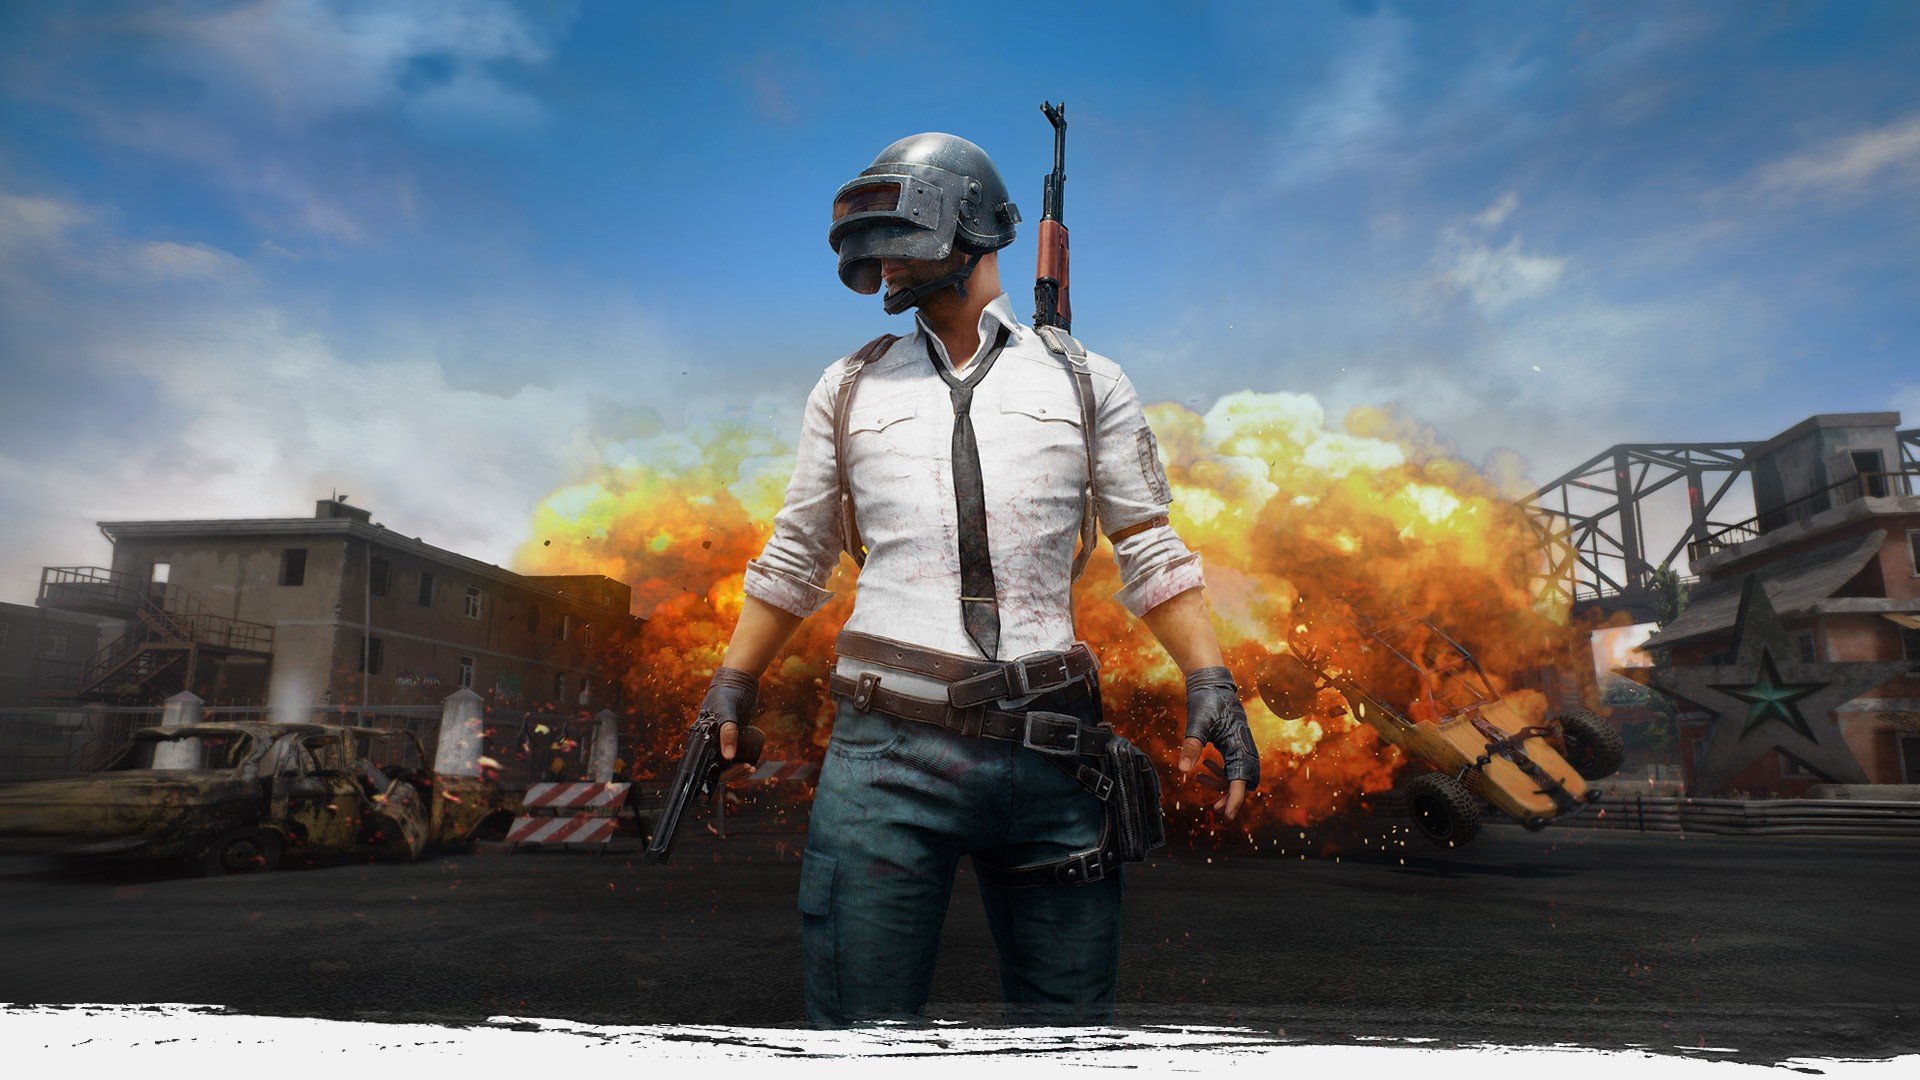 This handout image shows PlayerUnknown’s Battlegrounds Photo: Handout